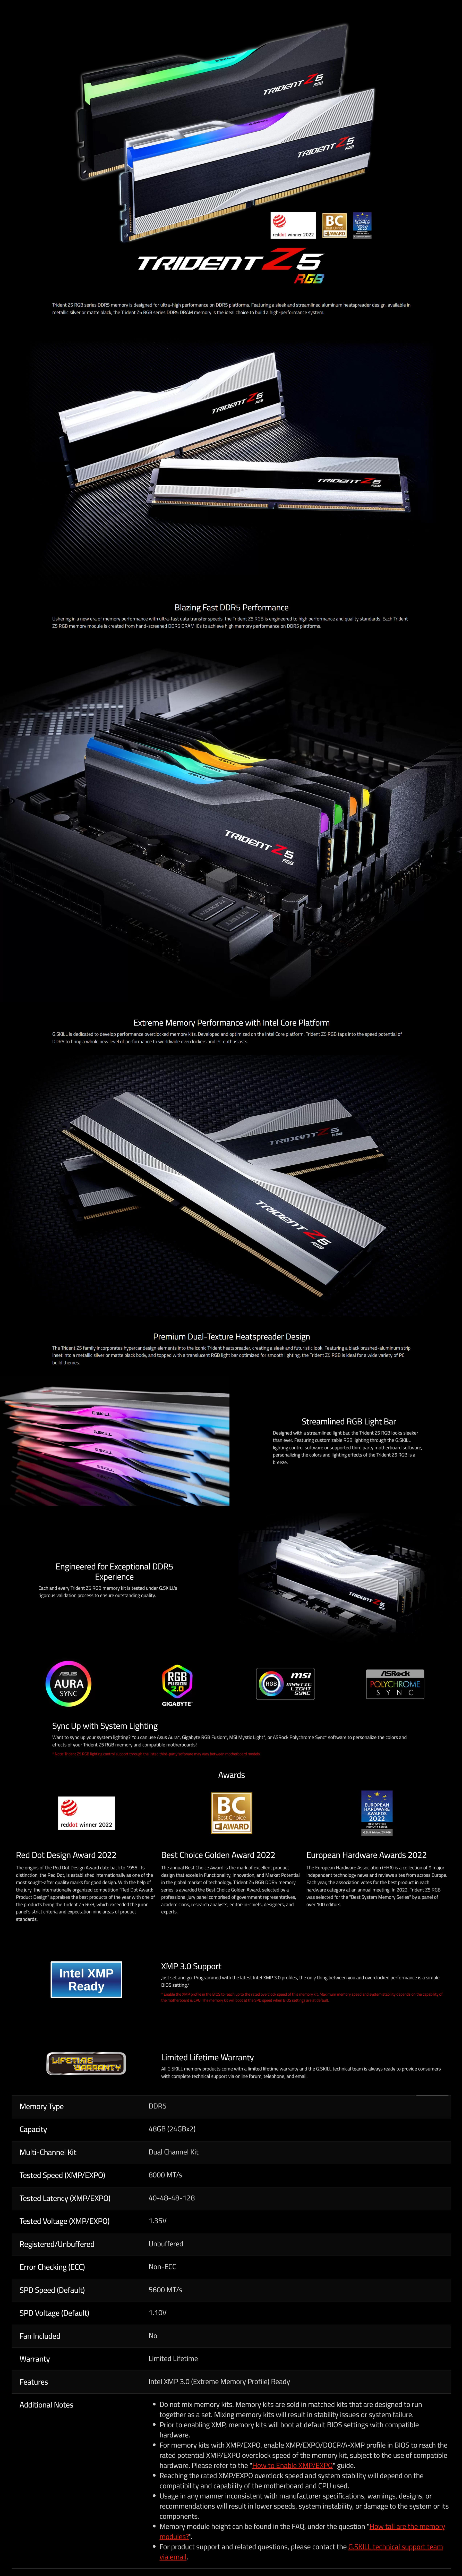 A large marketing image providing additional information about the product G.Skill 48GB Kit (2x24GB) DDR5 Trident Z5 RGB C40 8000MHz - Black - Additional alt info not provided